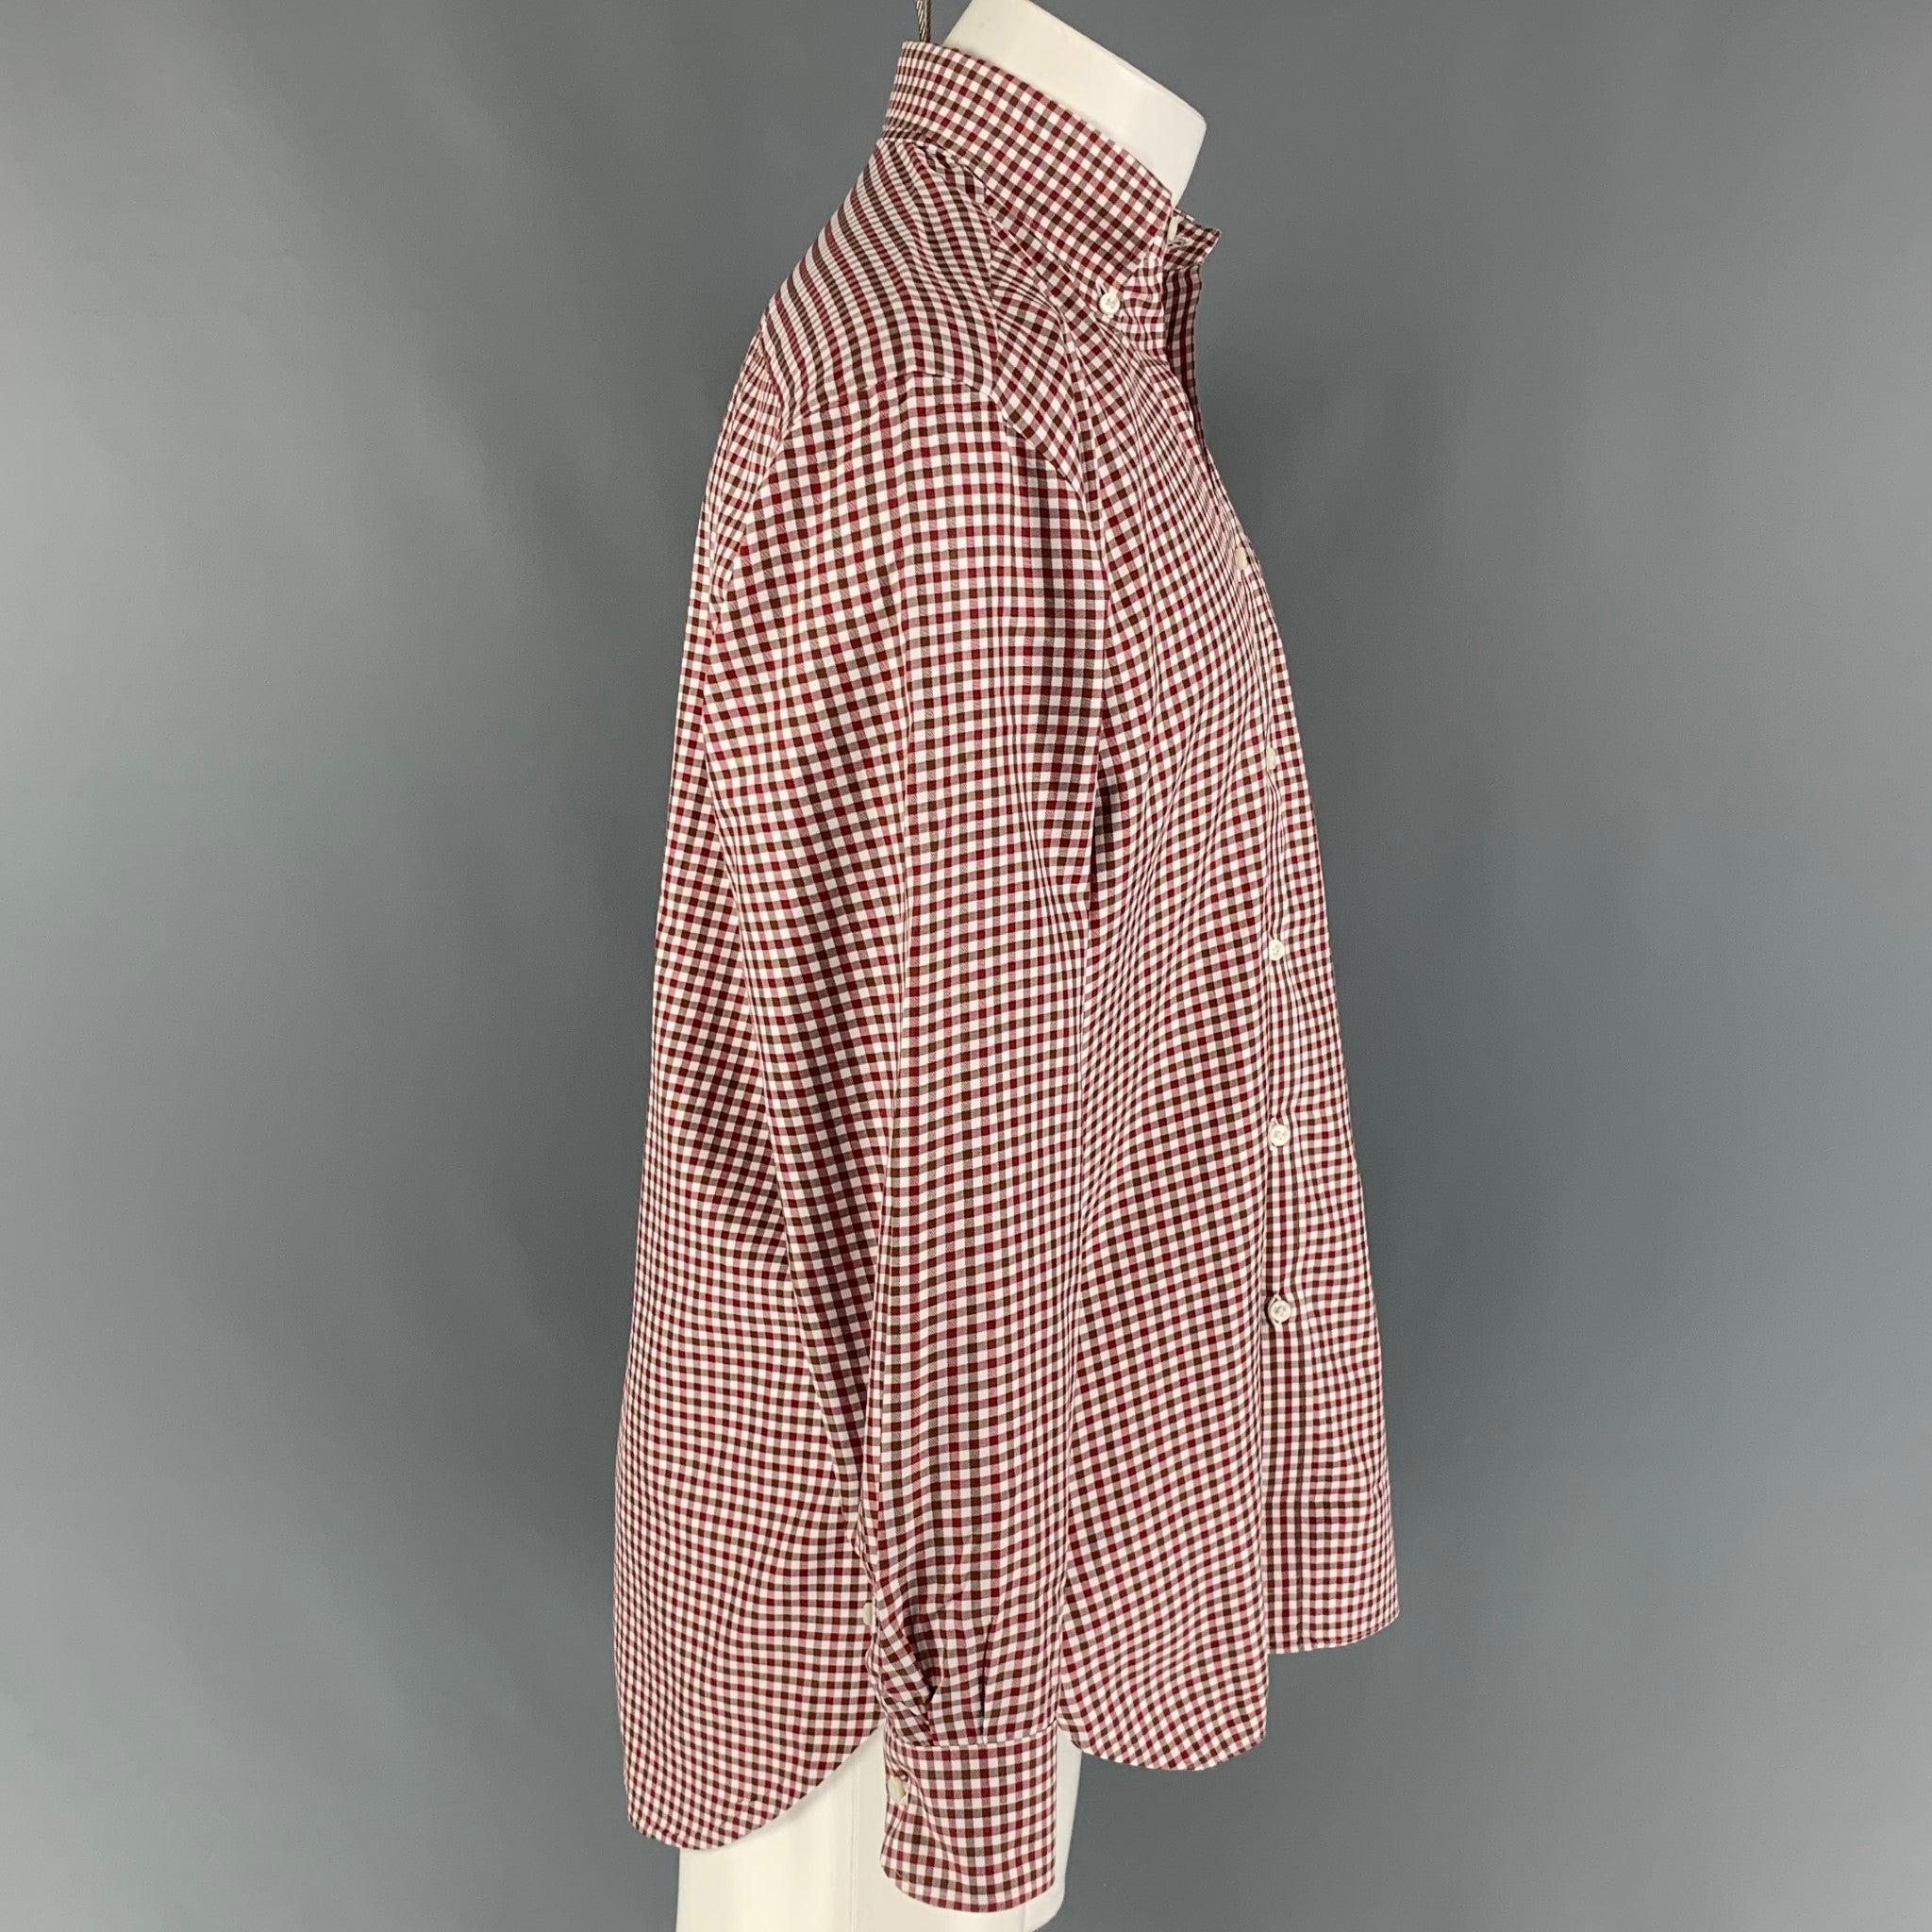 BORRELLI for WILKES BASHFORD long sleeve shirt comes in a white & burgundy checkered cotton featuring a button down collar, patch pocket, and a button up closure. Made in Italy.
Excellent Pre-Owned Condition.  

Marked:   15.5/39  

Measurements: 
